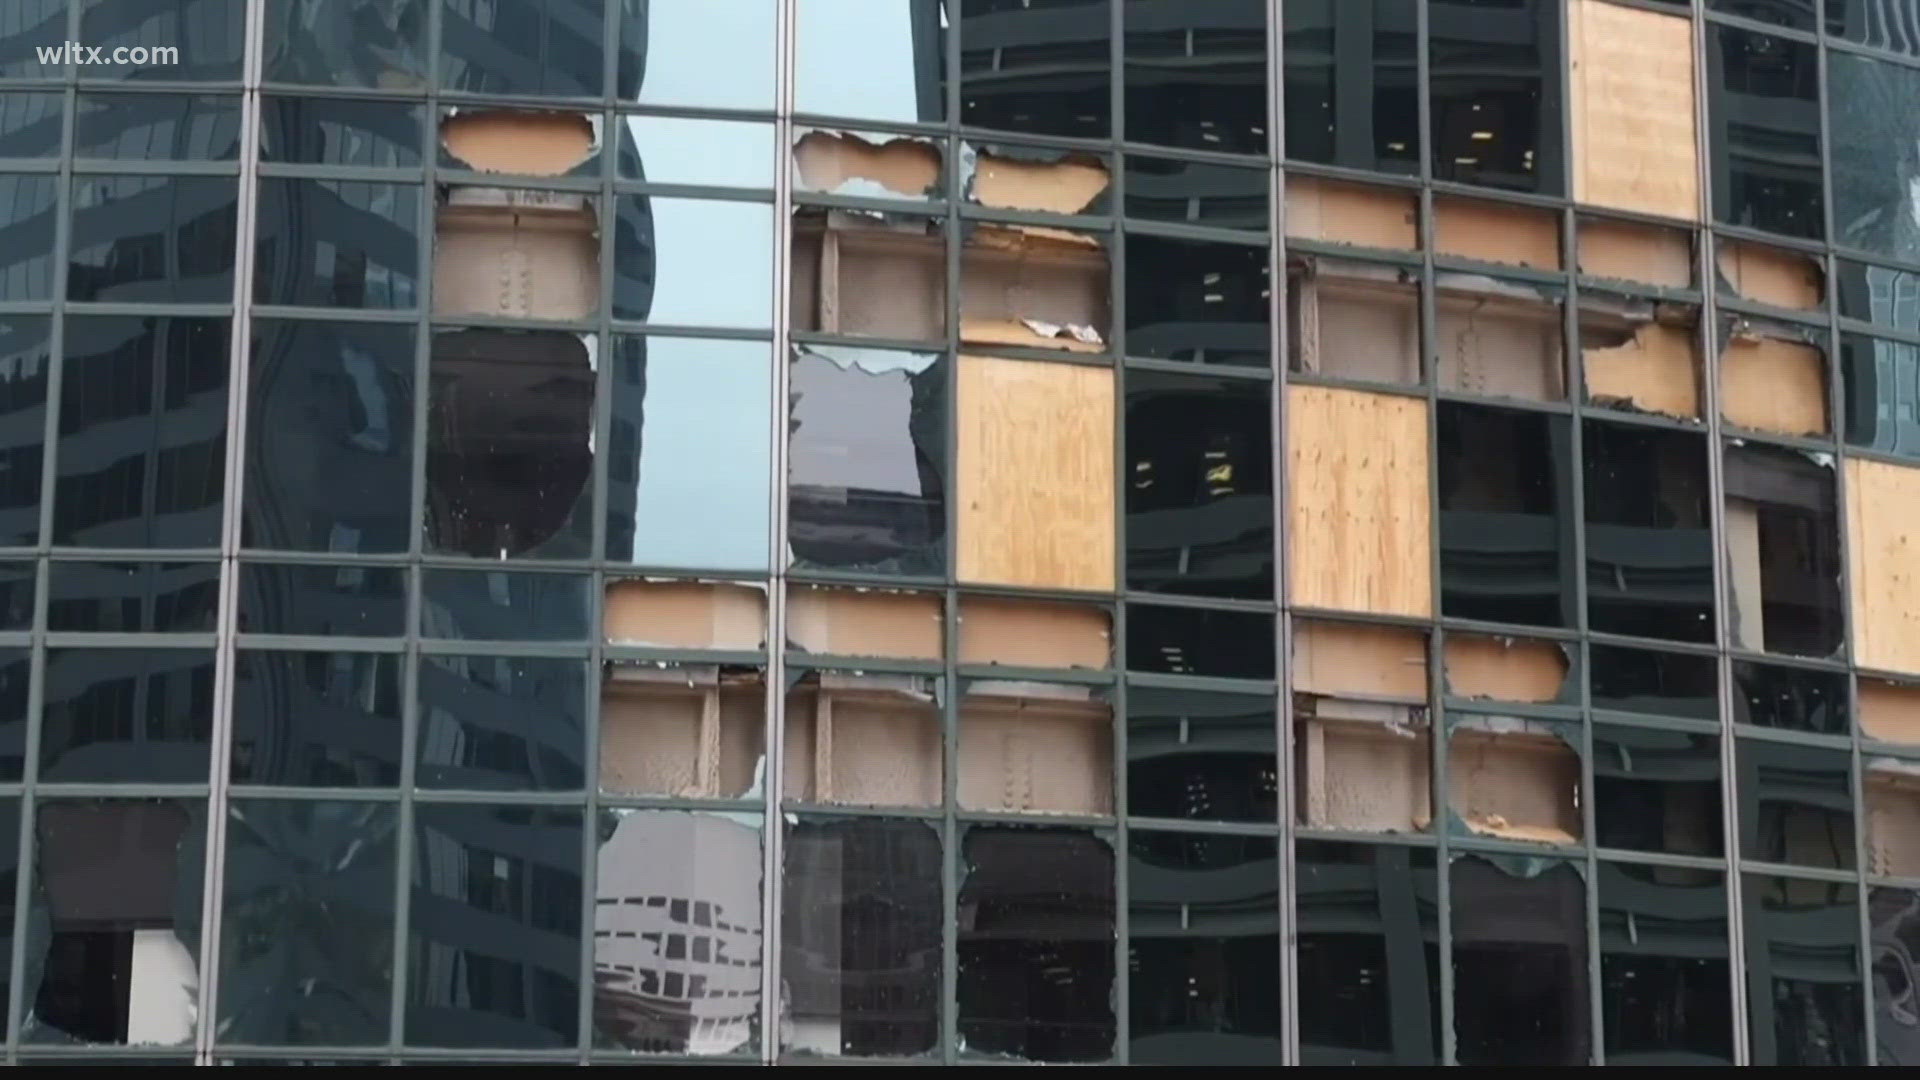 Hundreds of windows were shattered at downtown hotels and office buildings, with glass littering the streets below.